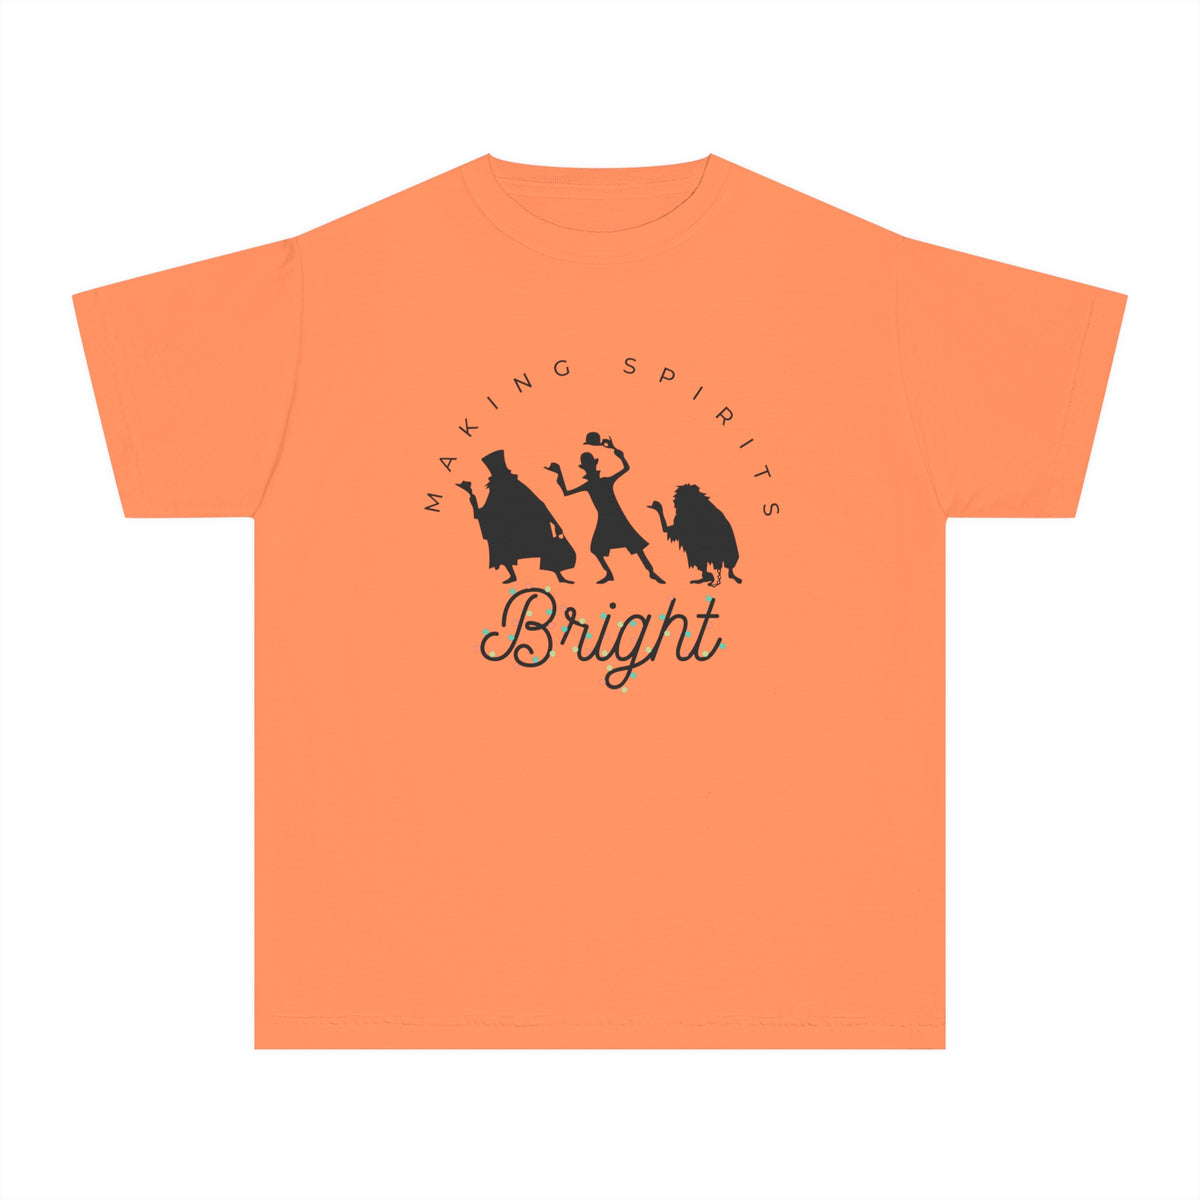 Making Spirits Bright Comfort Colors Youth Midweight Tee